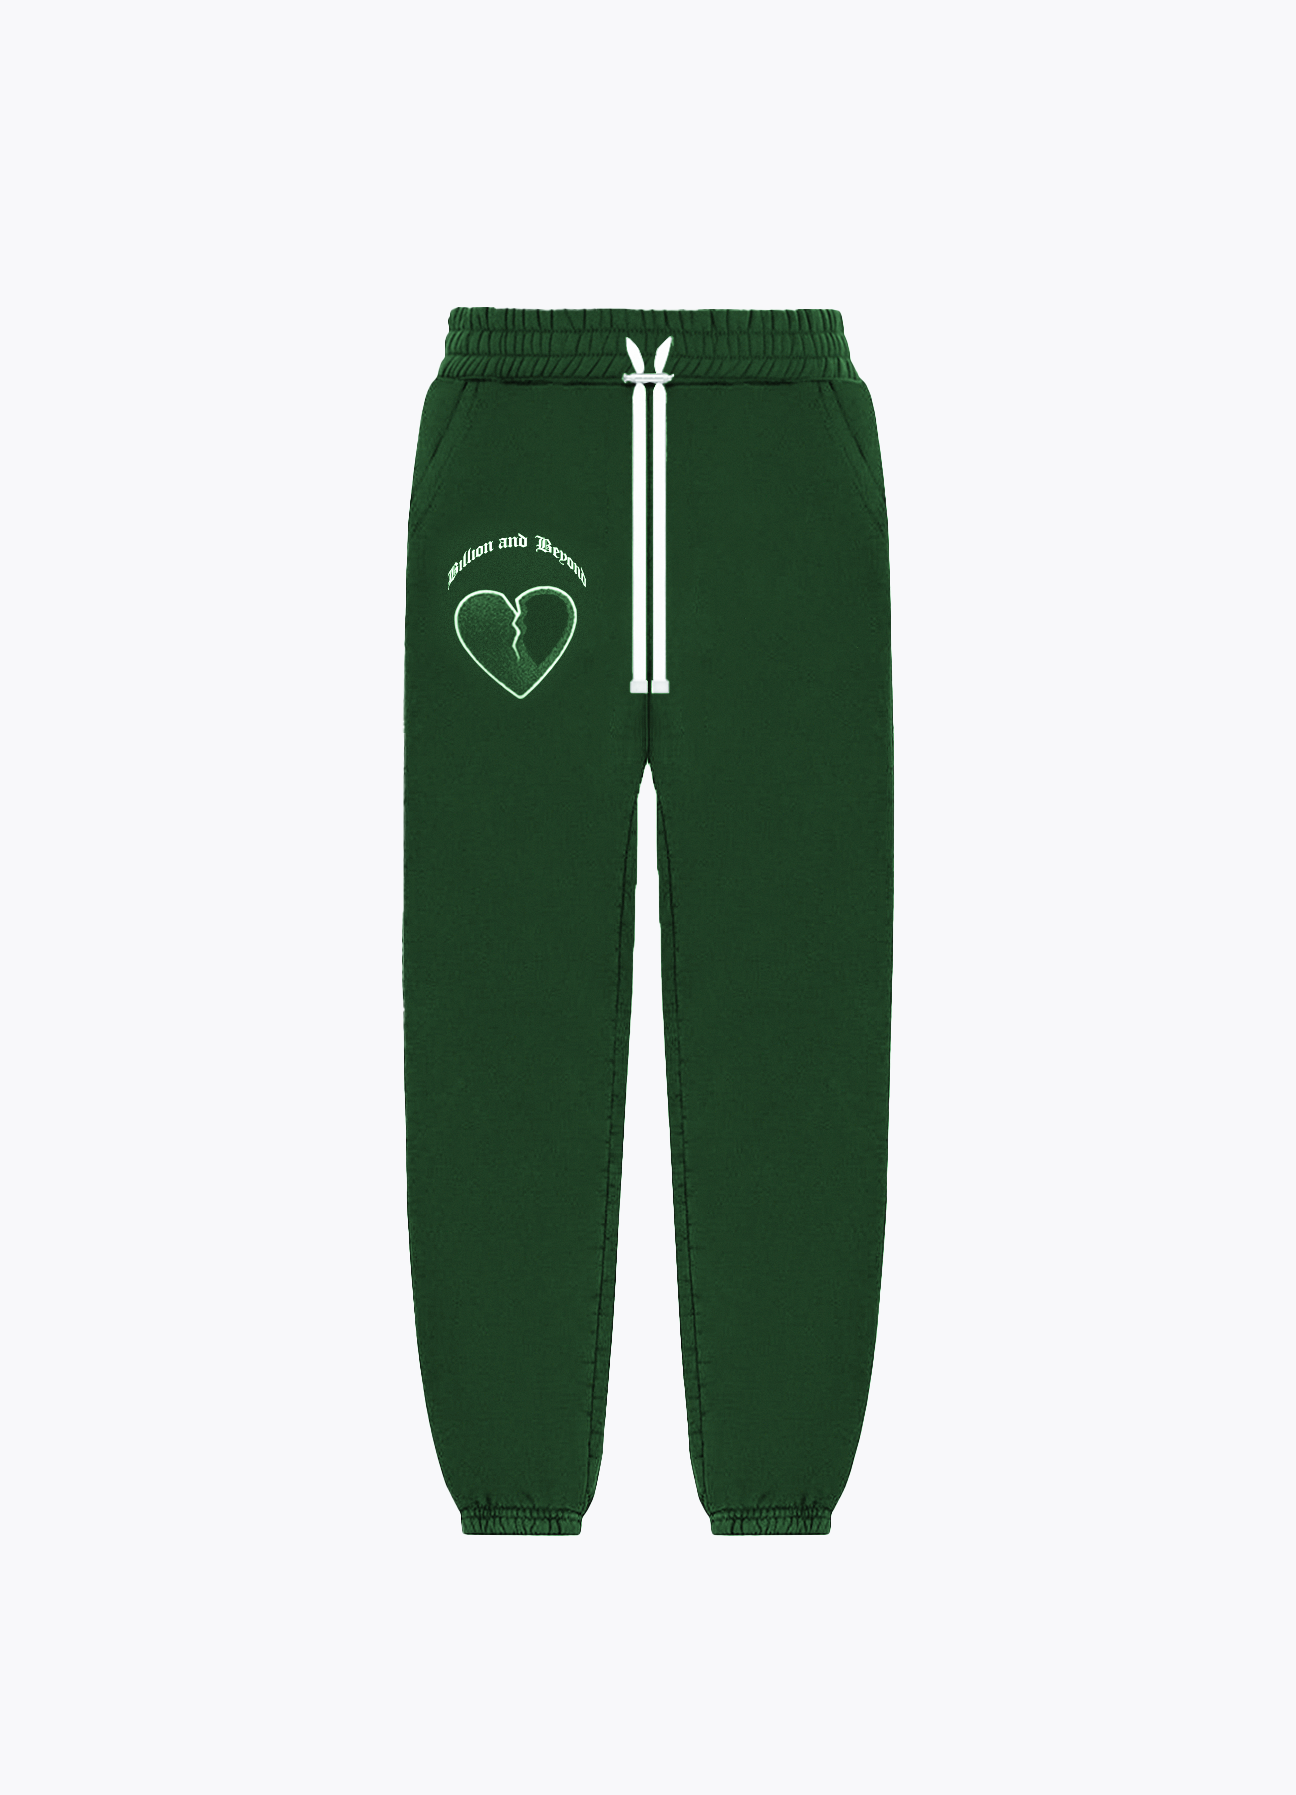 BILLION AND BEYOND - CRACK HEART SWEATPANTS ARMY GREEN